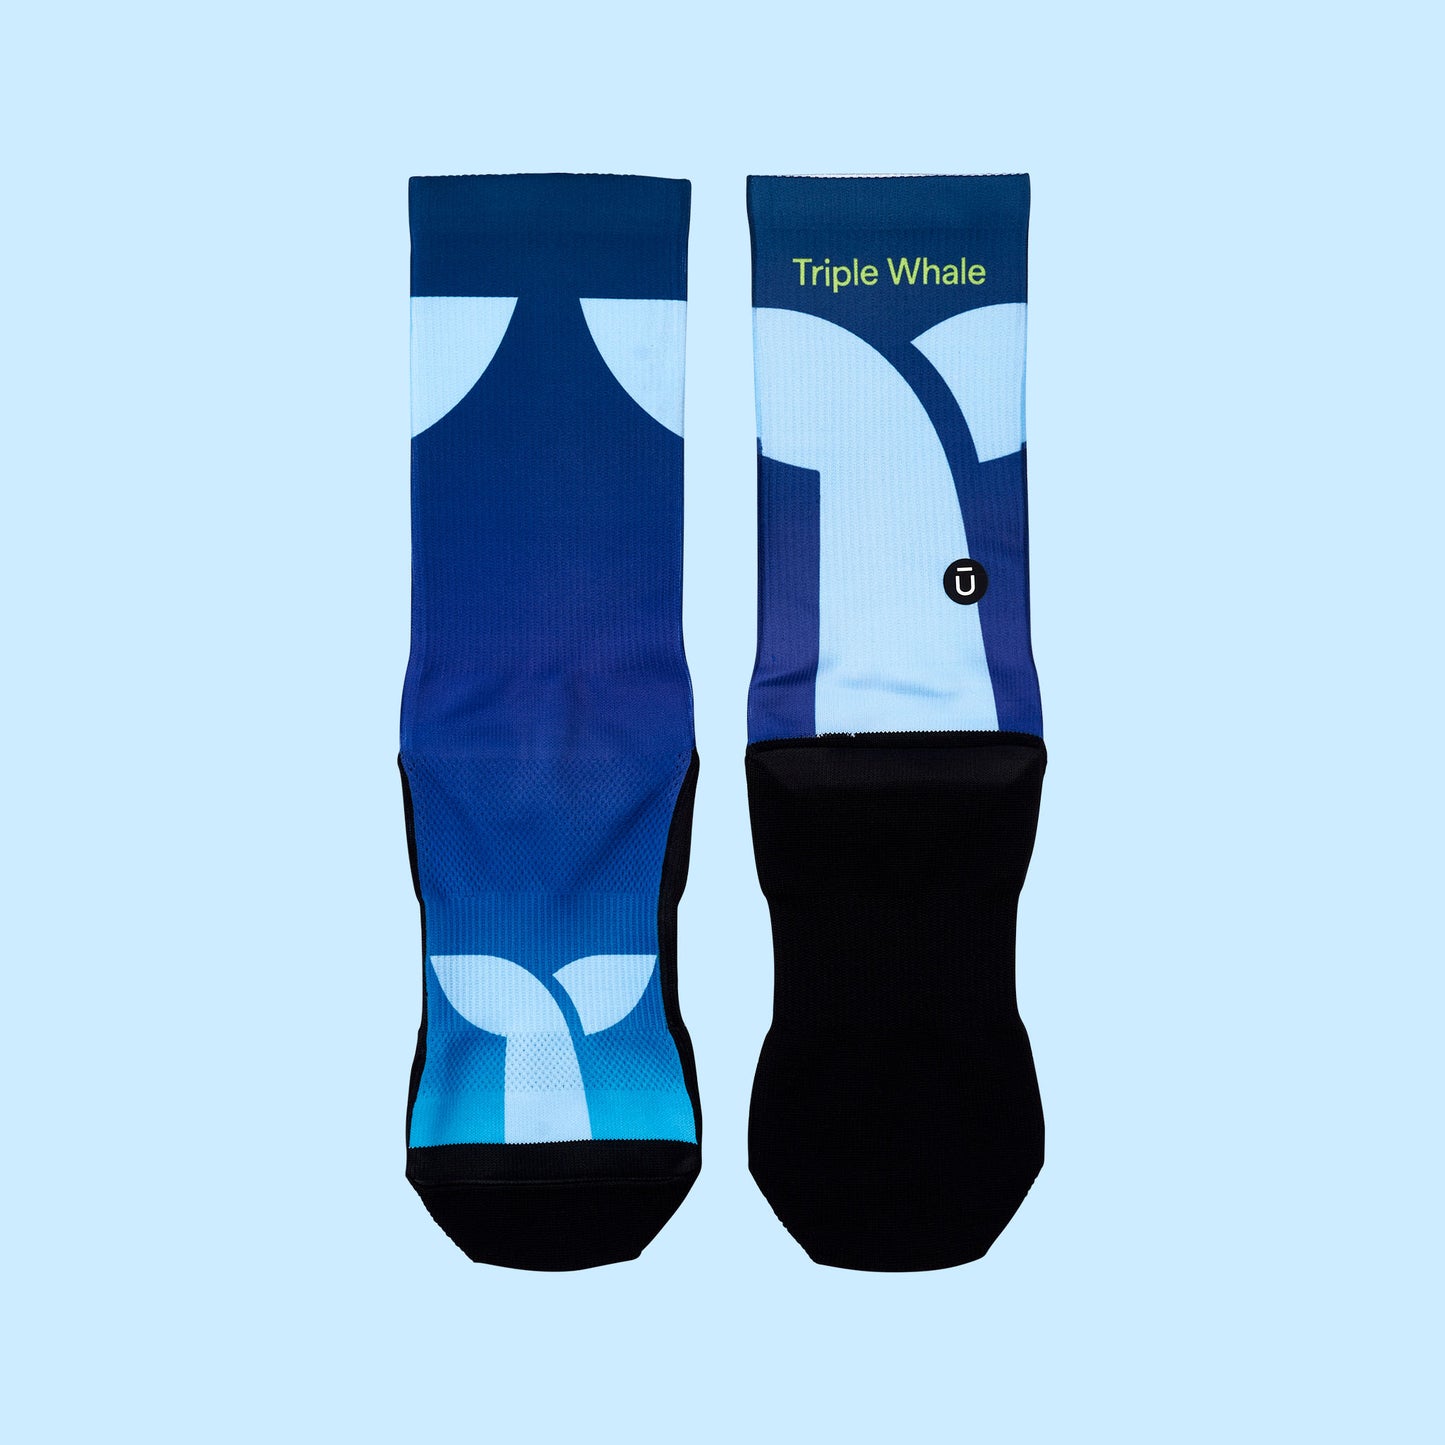 Triple Whale performance socks by Outway